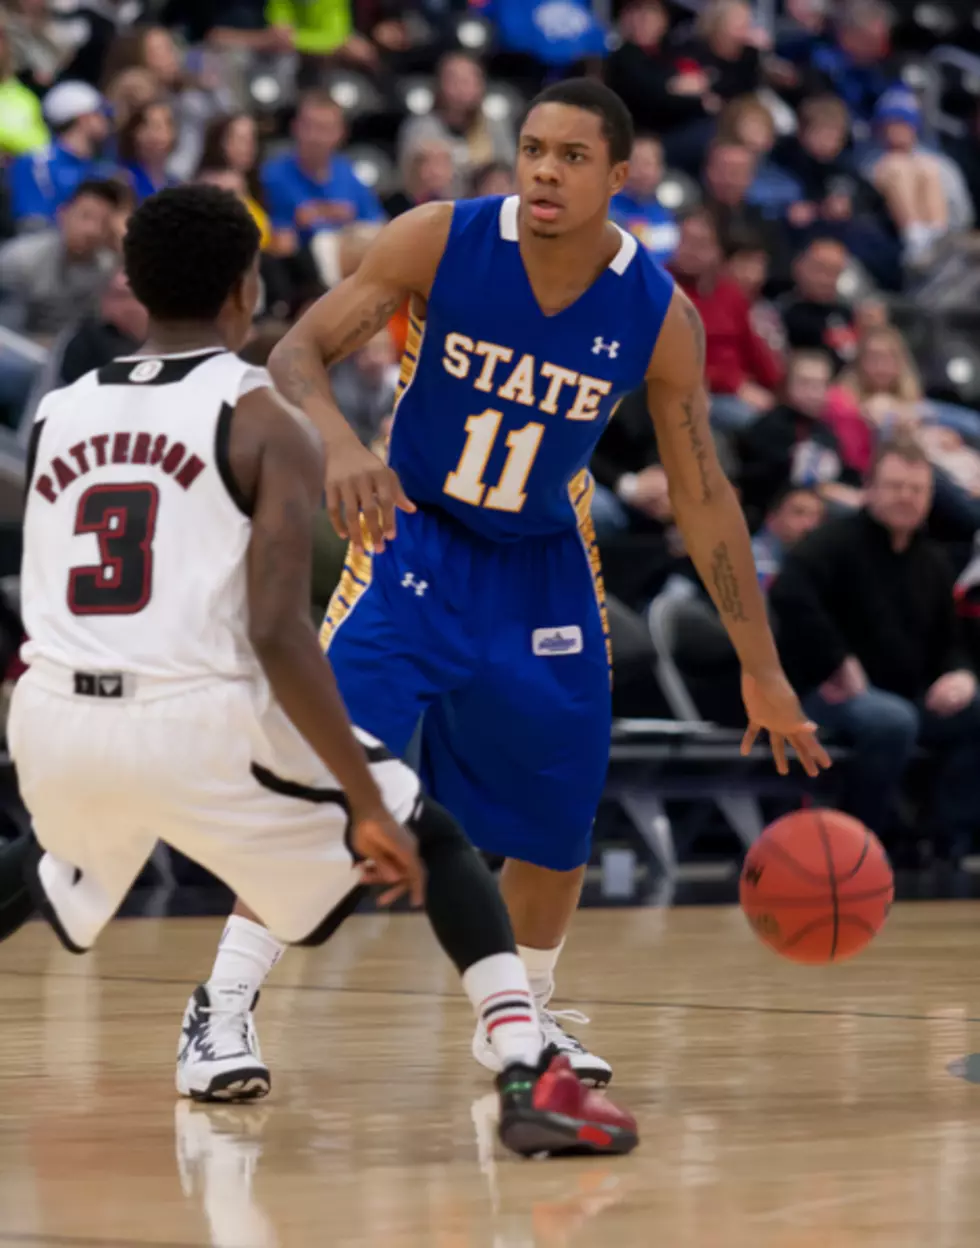 Marshall Honored as Streaking Jackrabbits Look for Third Straight Win